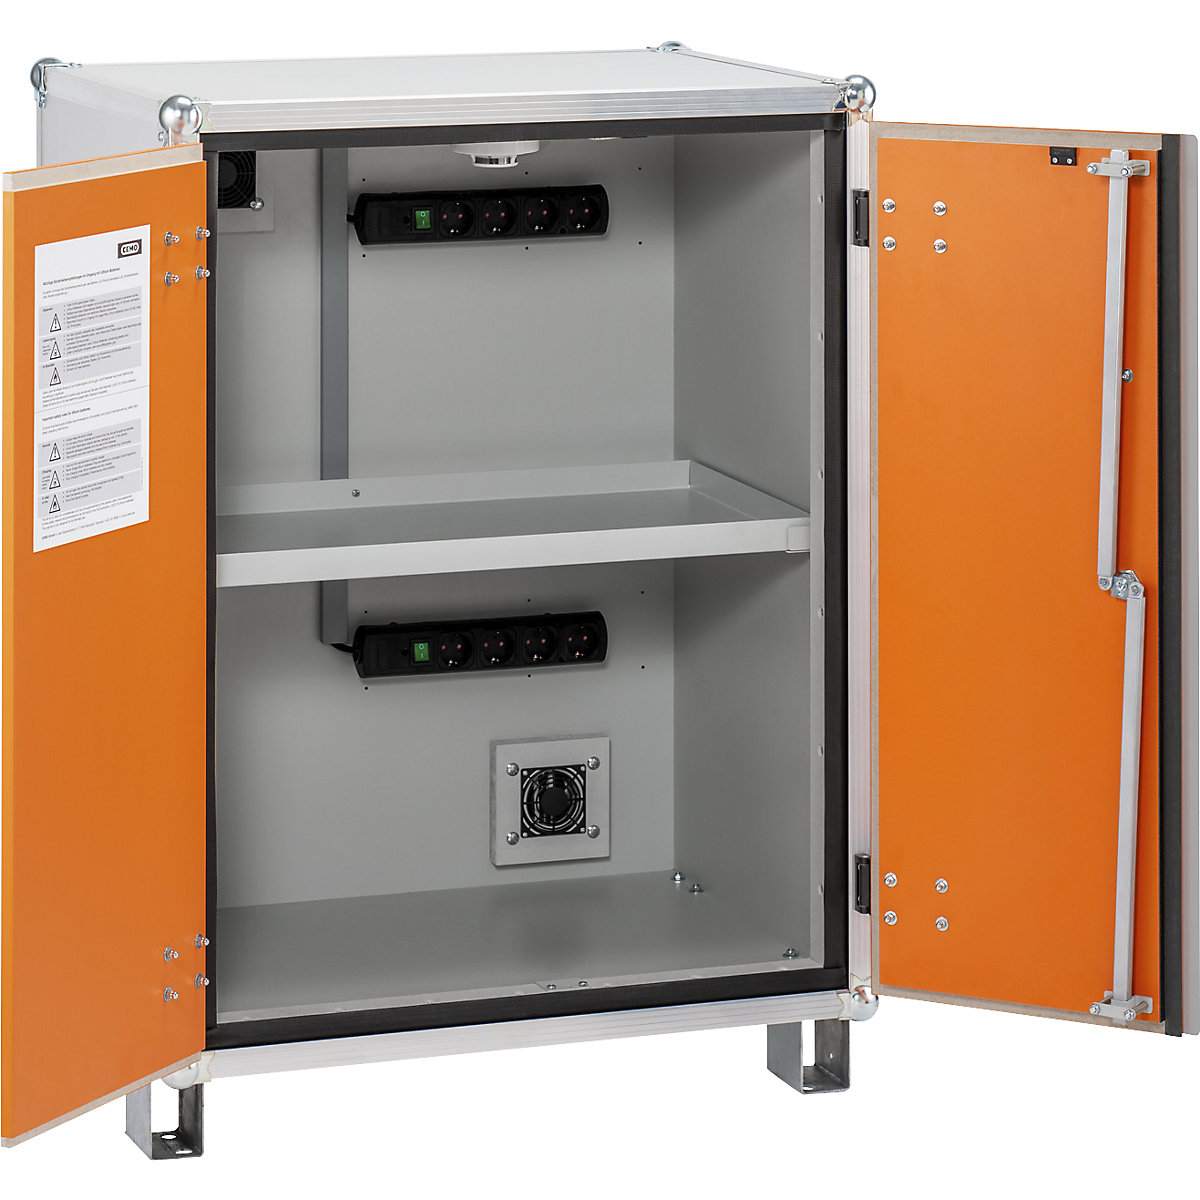 PREMIUM safety battery charging cabinet – CEMO